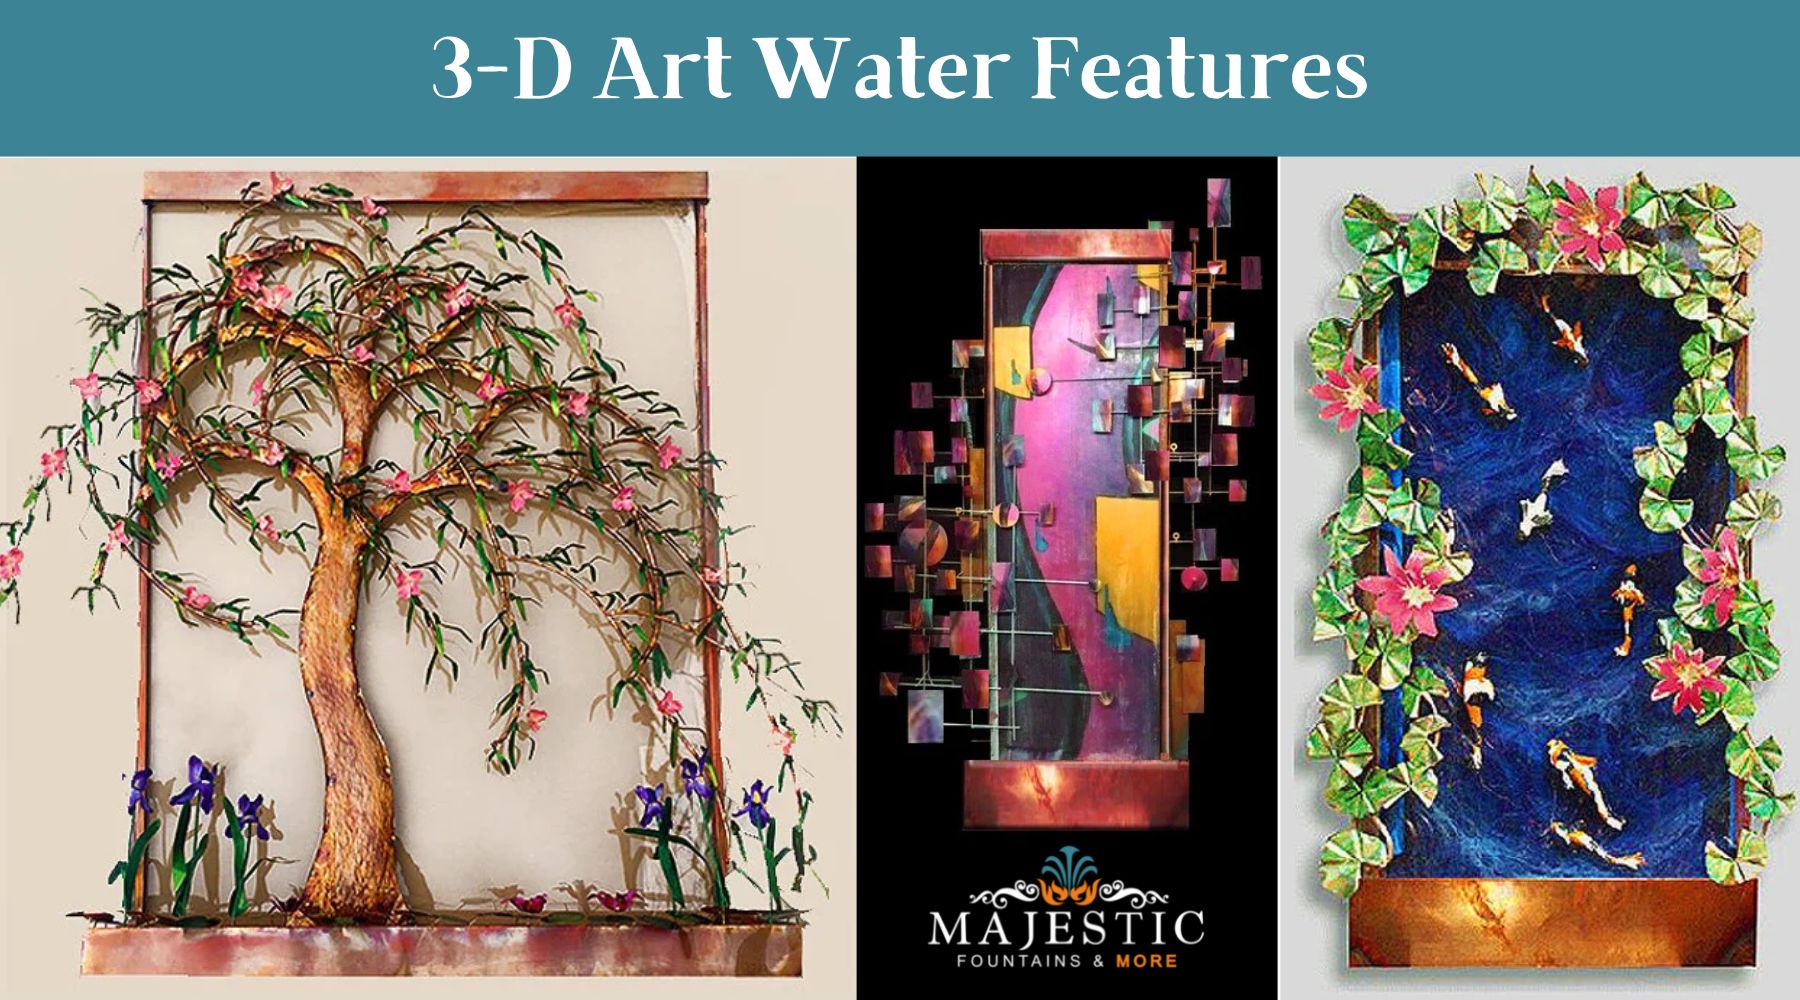 Top 5 3-D Art Water Features To Add Indoors